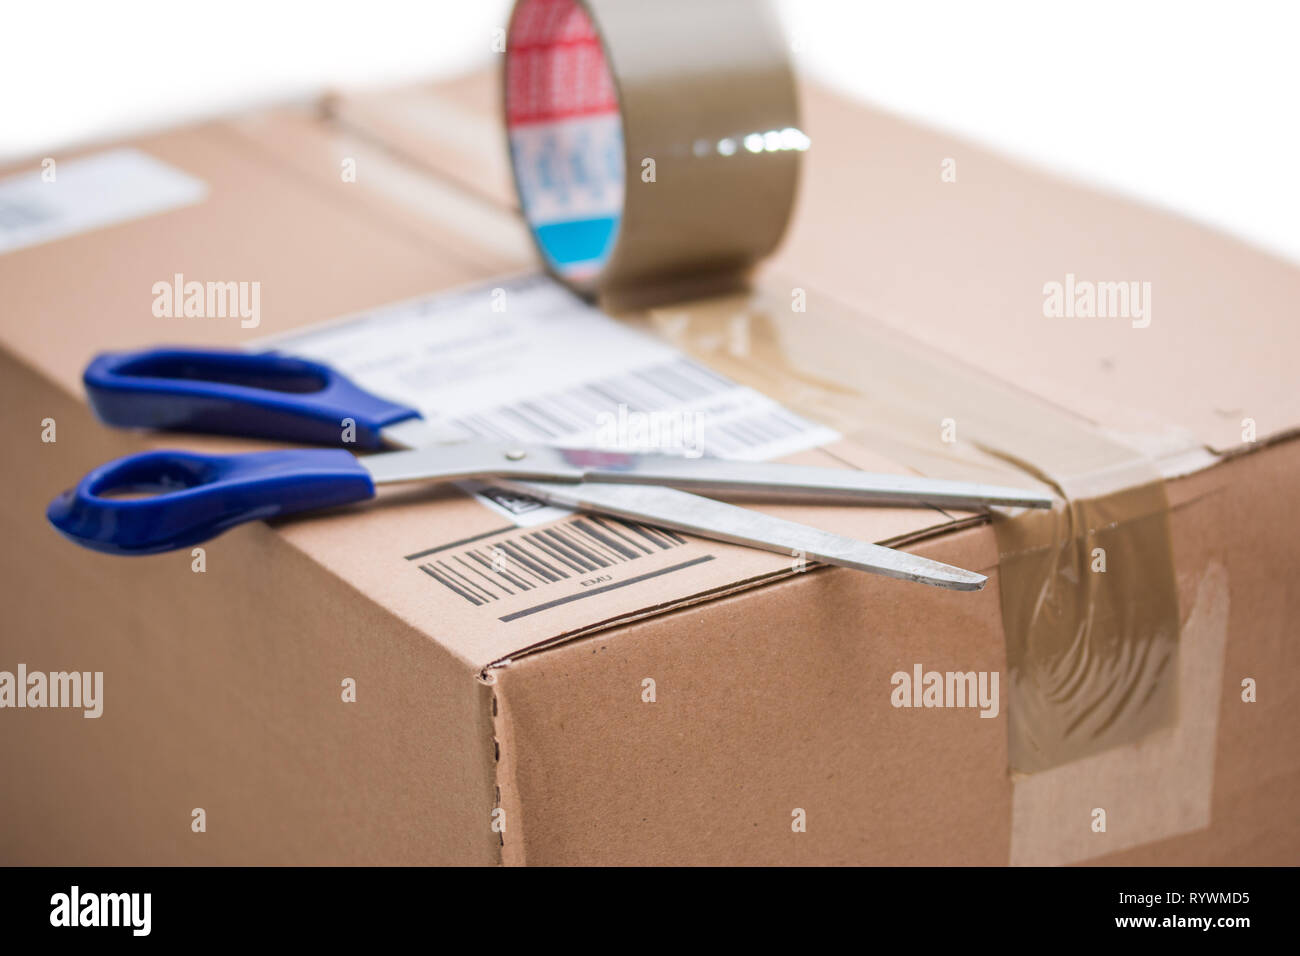 https://c8.alamy.com/comp/RYWMD5/shipping-concept-cardboard-box-scissors-and-sticky-tape-RYWMD5.jpg